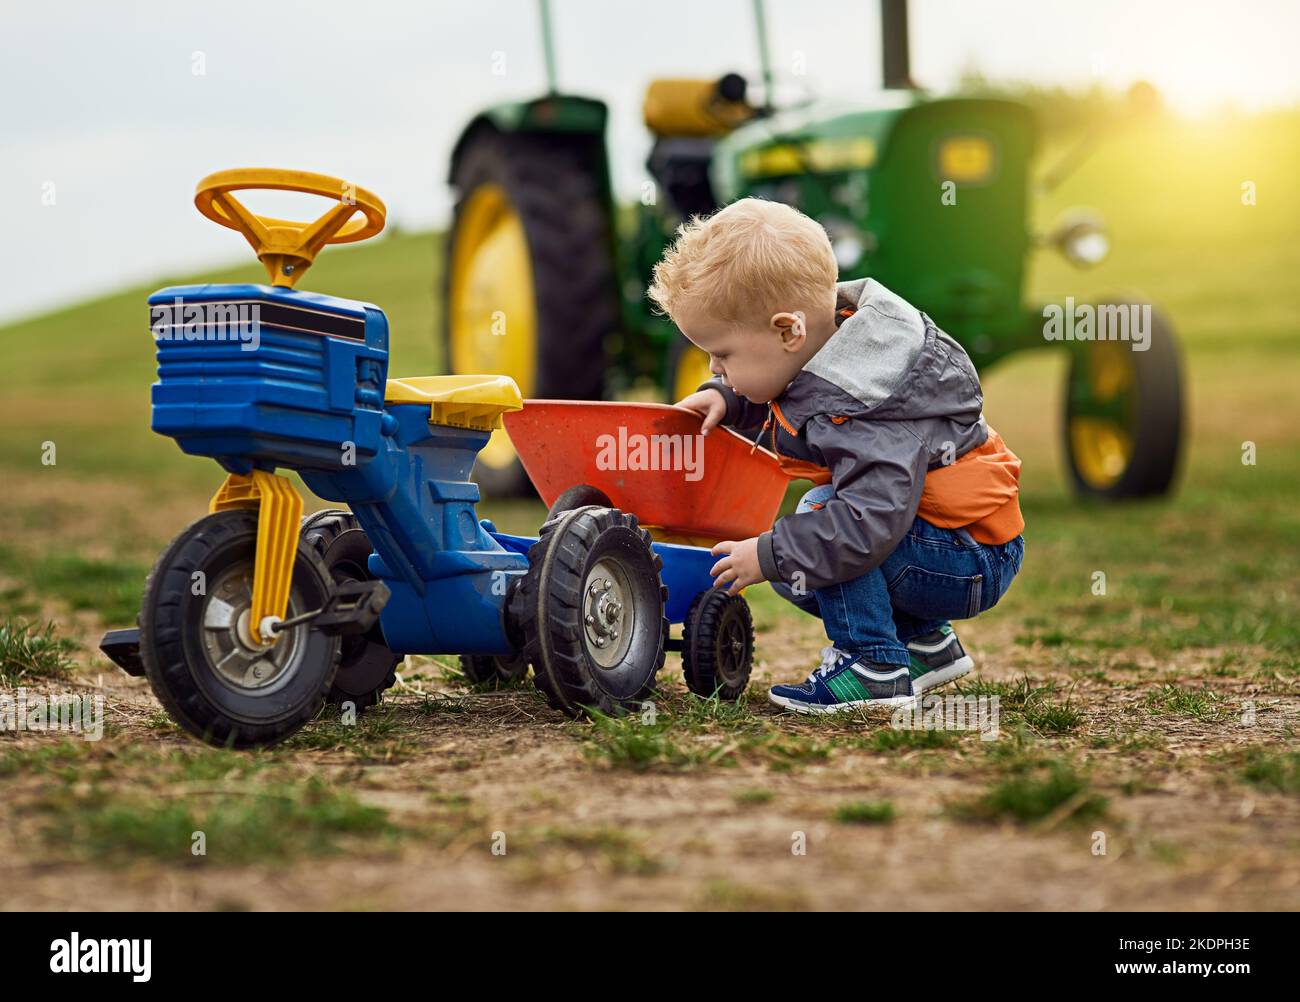 Nothing teaches self sufficiency like growing up on a farm. an adorable little boy playing with a toy truck on a farm. Stock Photo